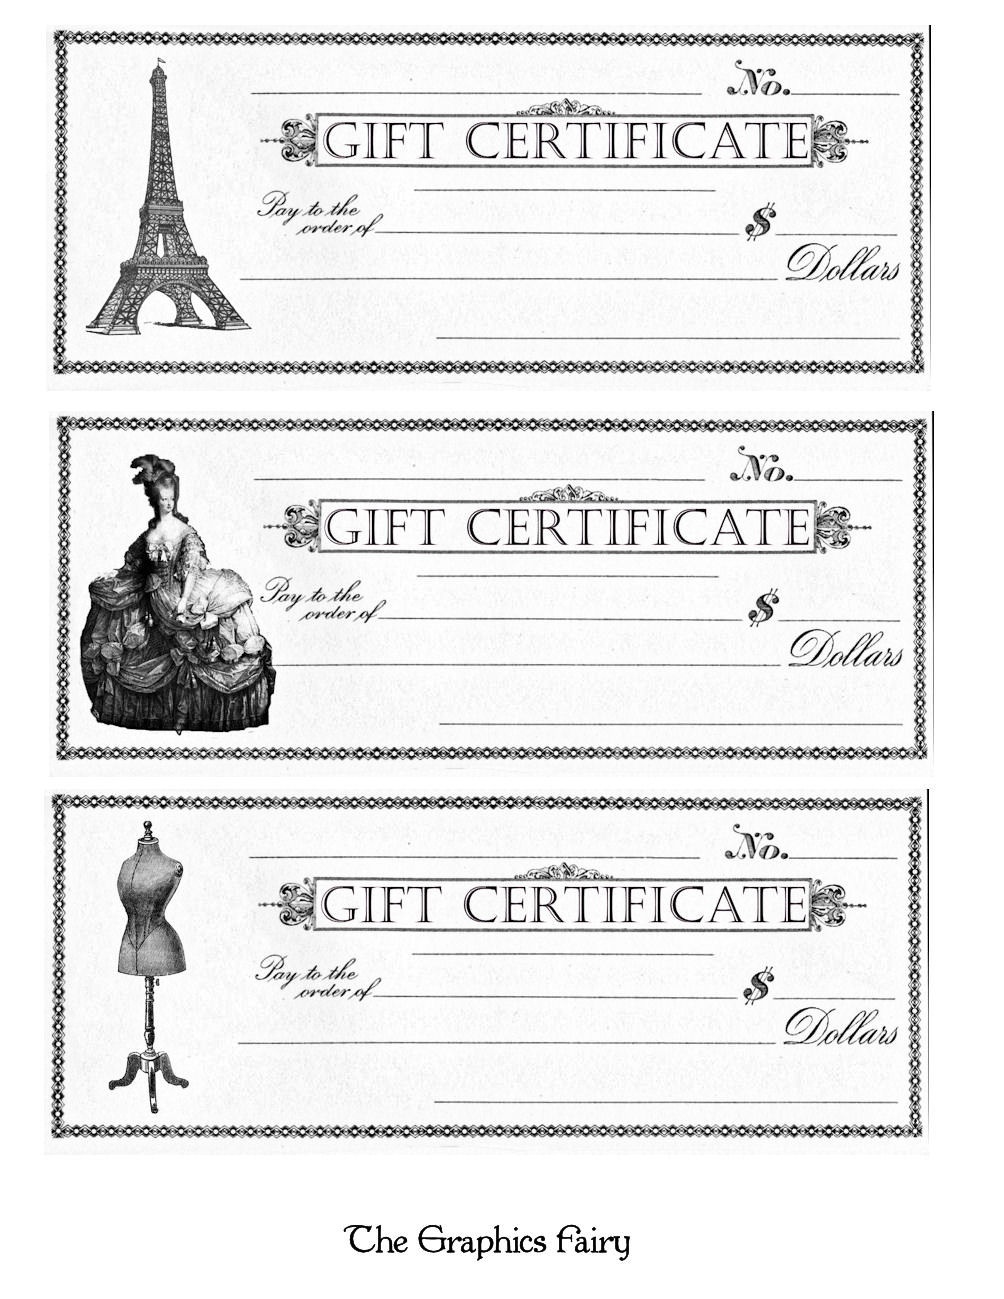 Free Printable - Gift Certificates - The Graphics Fairy - Free Printable Gift Certificates